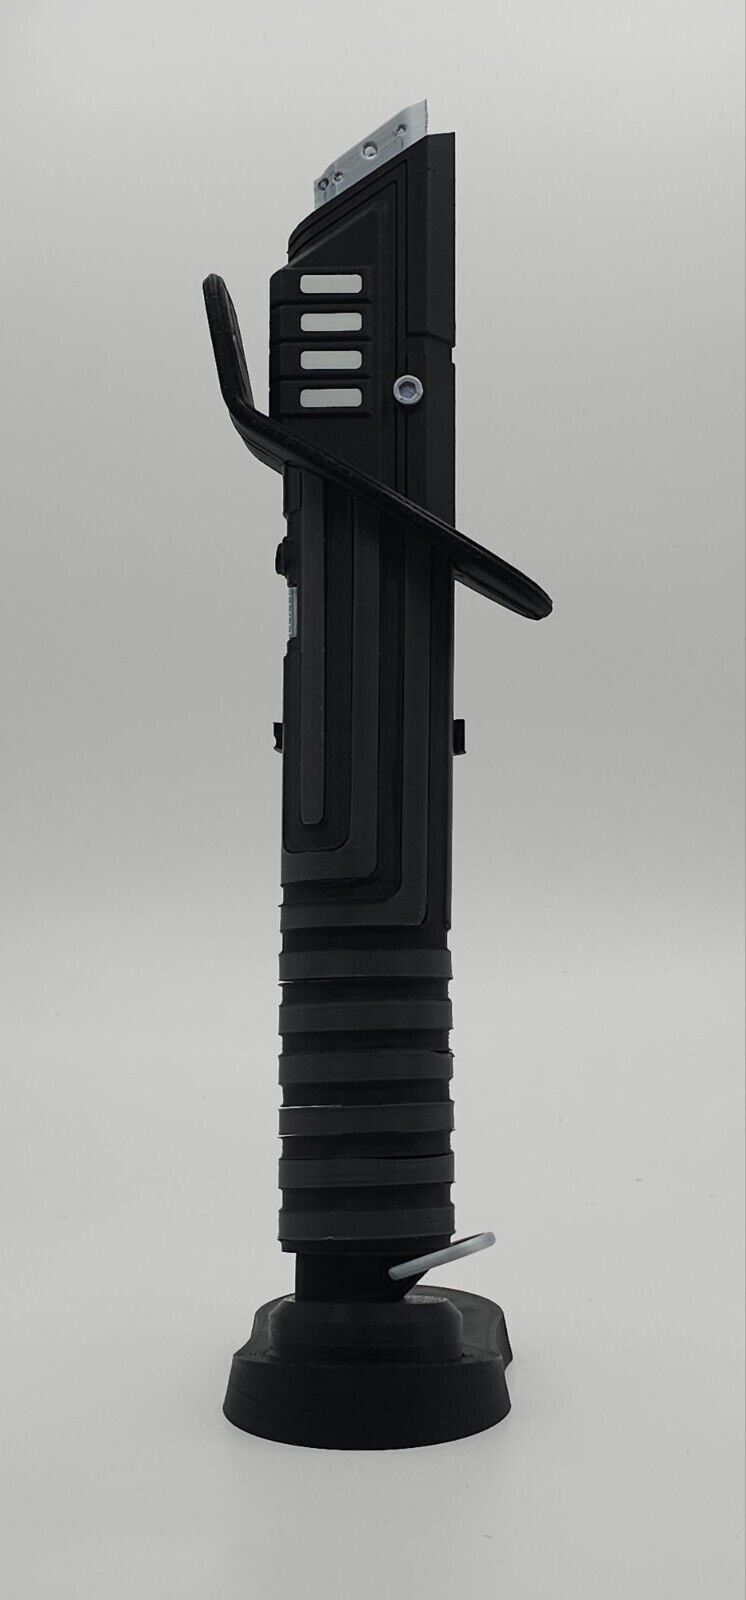 Darksaber Replica: 3D Printed, Highly Detailed for Star Wars Enthusiasts